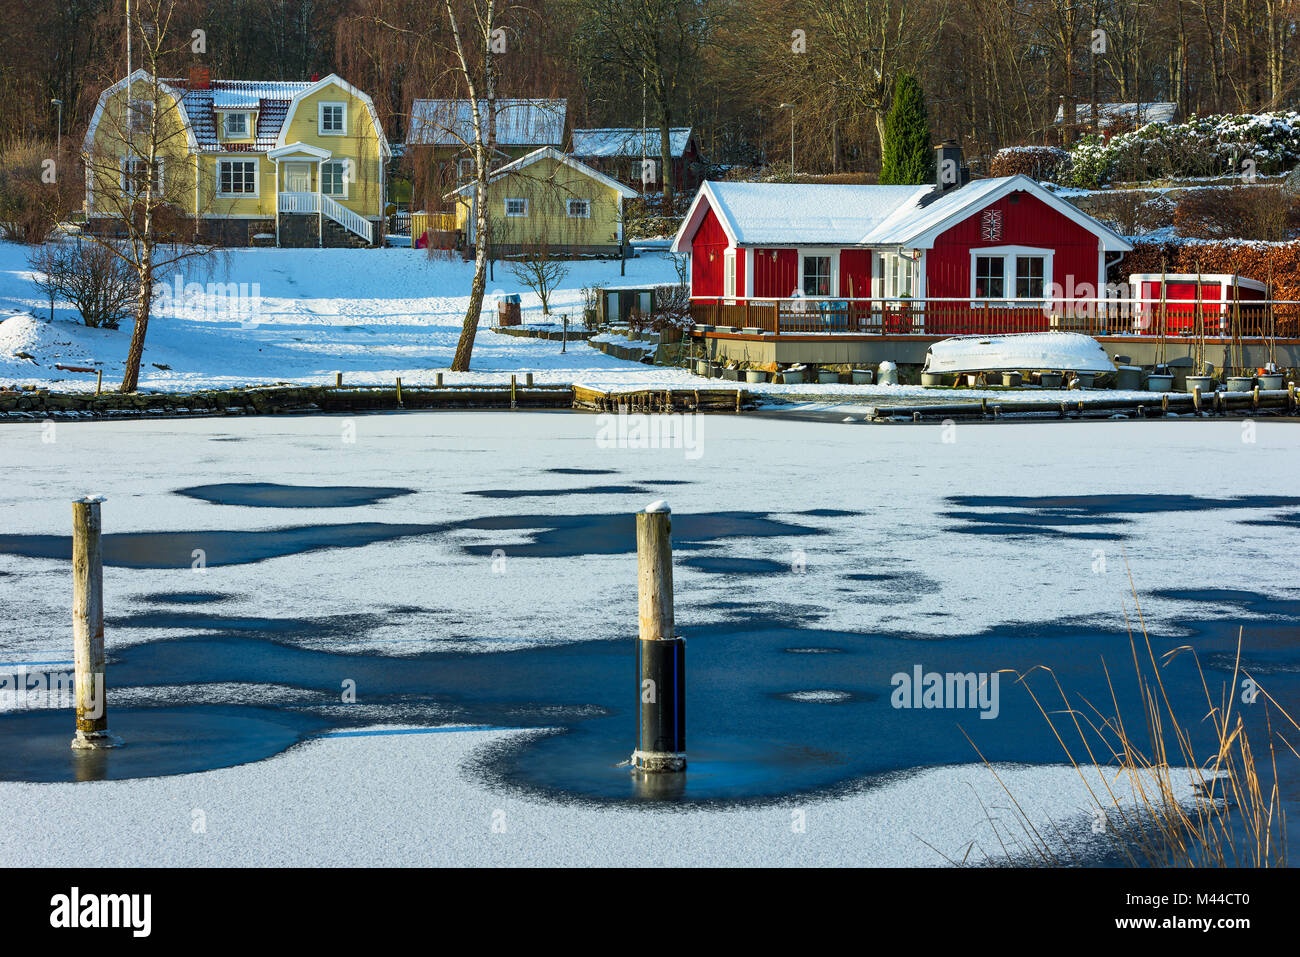 Bokevik, Sweden - February 7, 2018: Documentary of everyday life and environment. Small fishing village in winter with frozen sea and snow on the grou Stock Photo